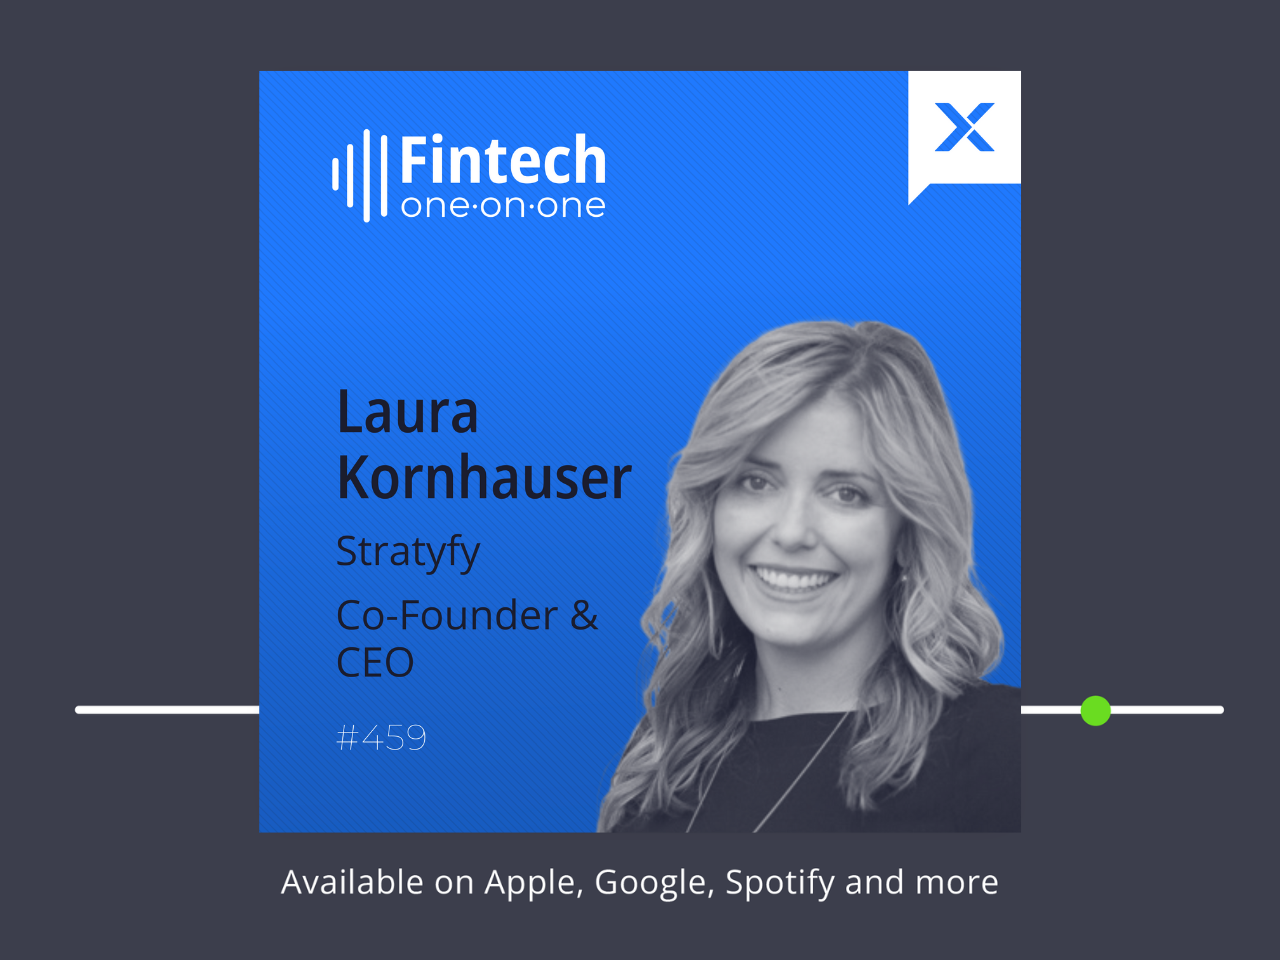 Laura Kornhauser, CEO and Co-Founder of Stratyfy on advanced AI models for underwriting